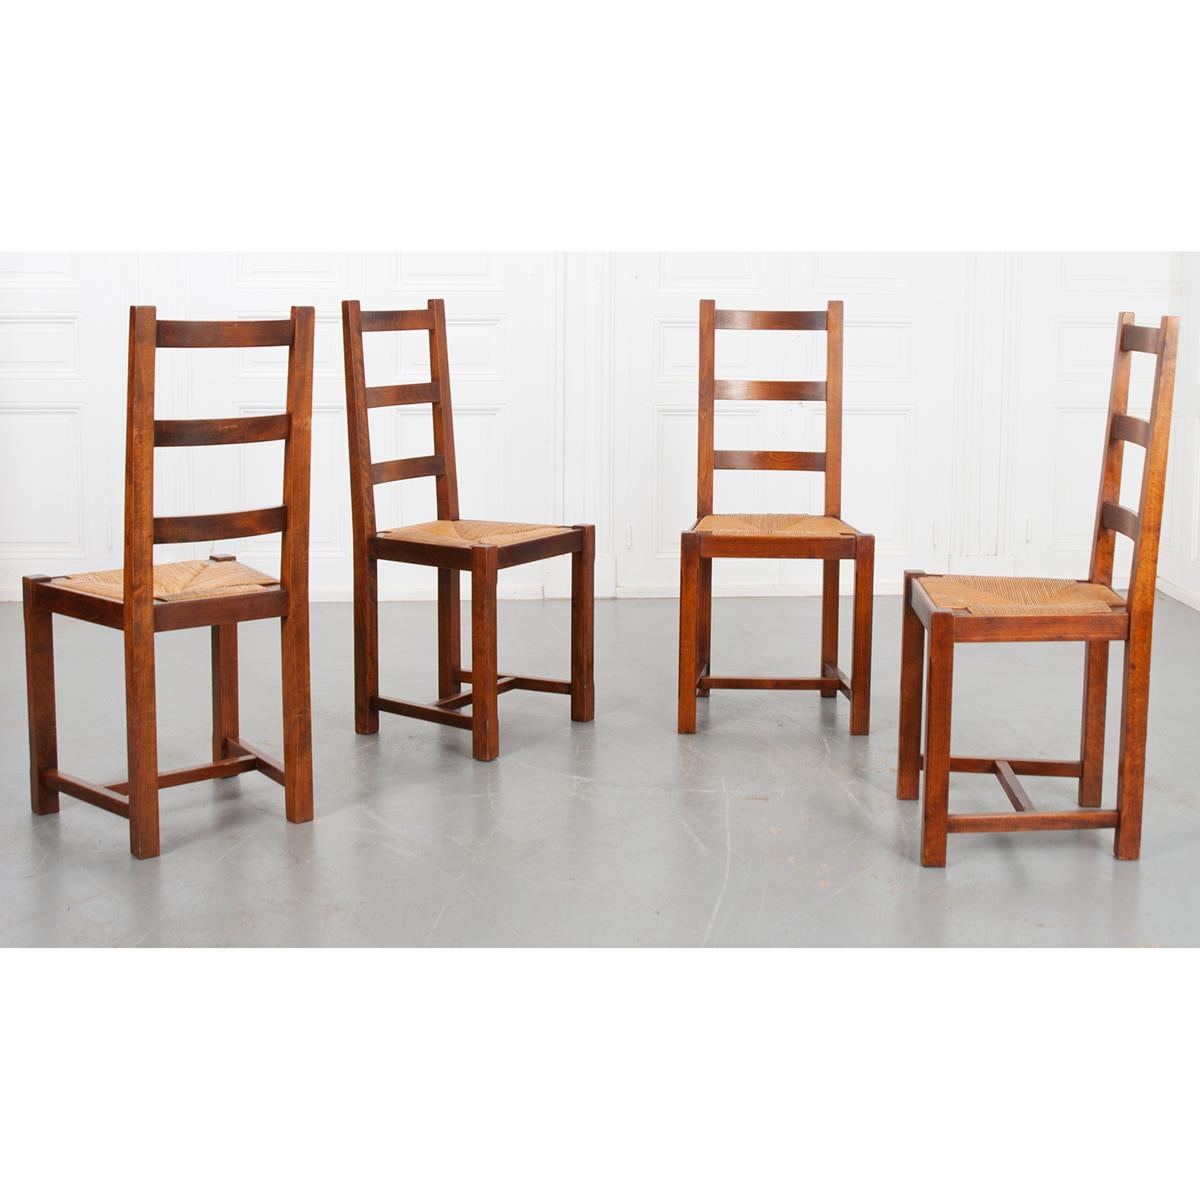 This set of four chairs is French 19th century. They are constructed of solid oak and have removable rush seats which makes the chairs very sturdy. This way over time if the chairs should become loose, you can easily tighten each chair without